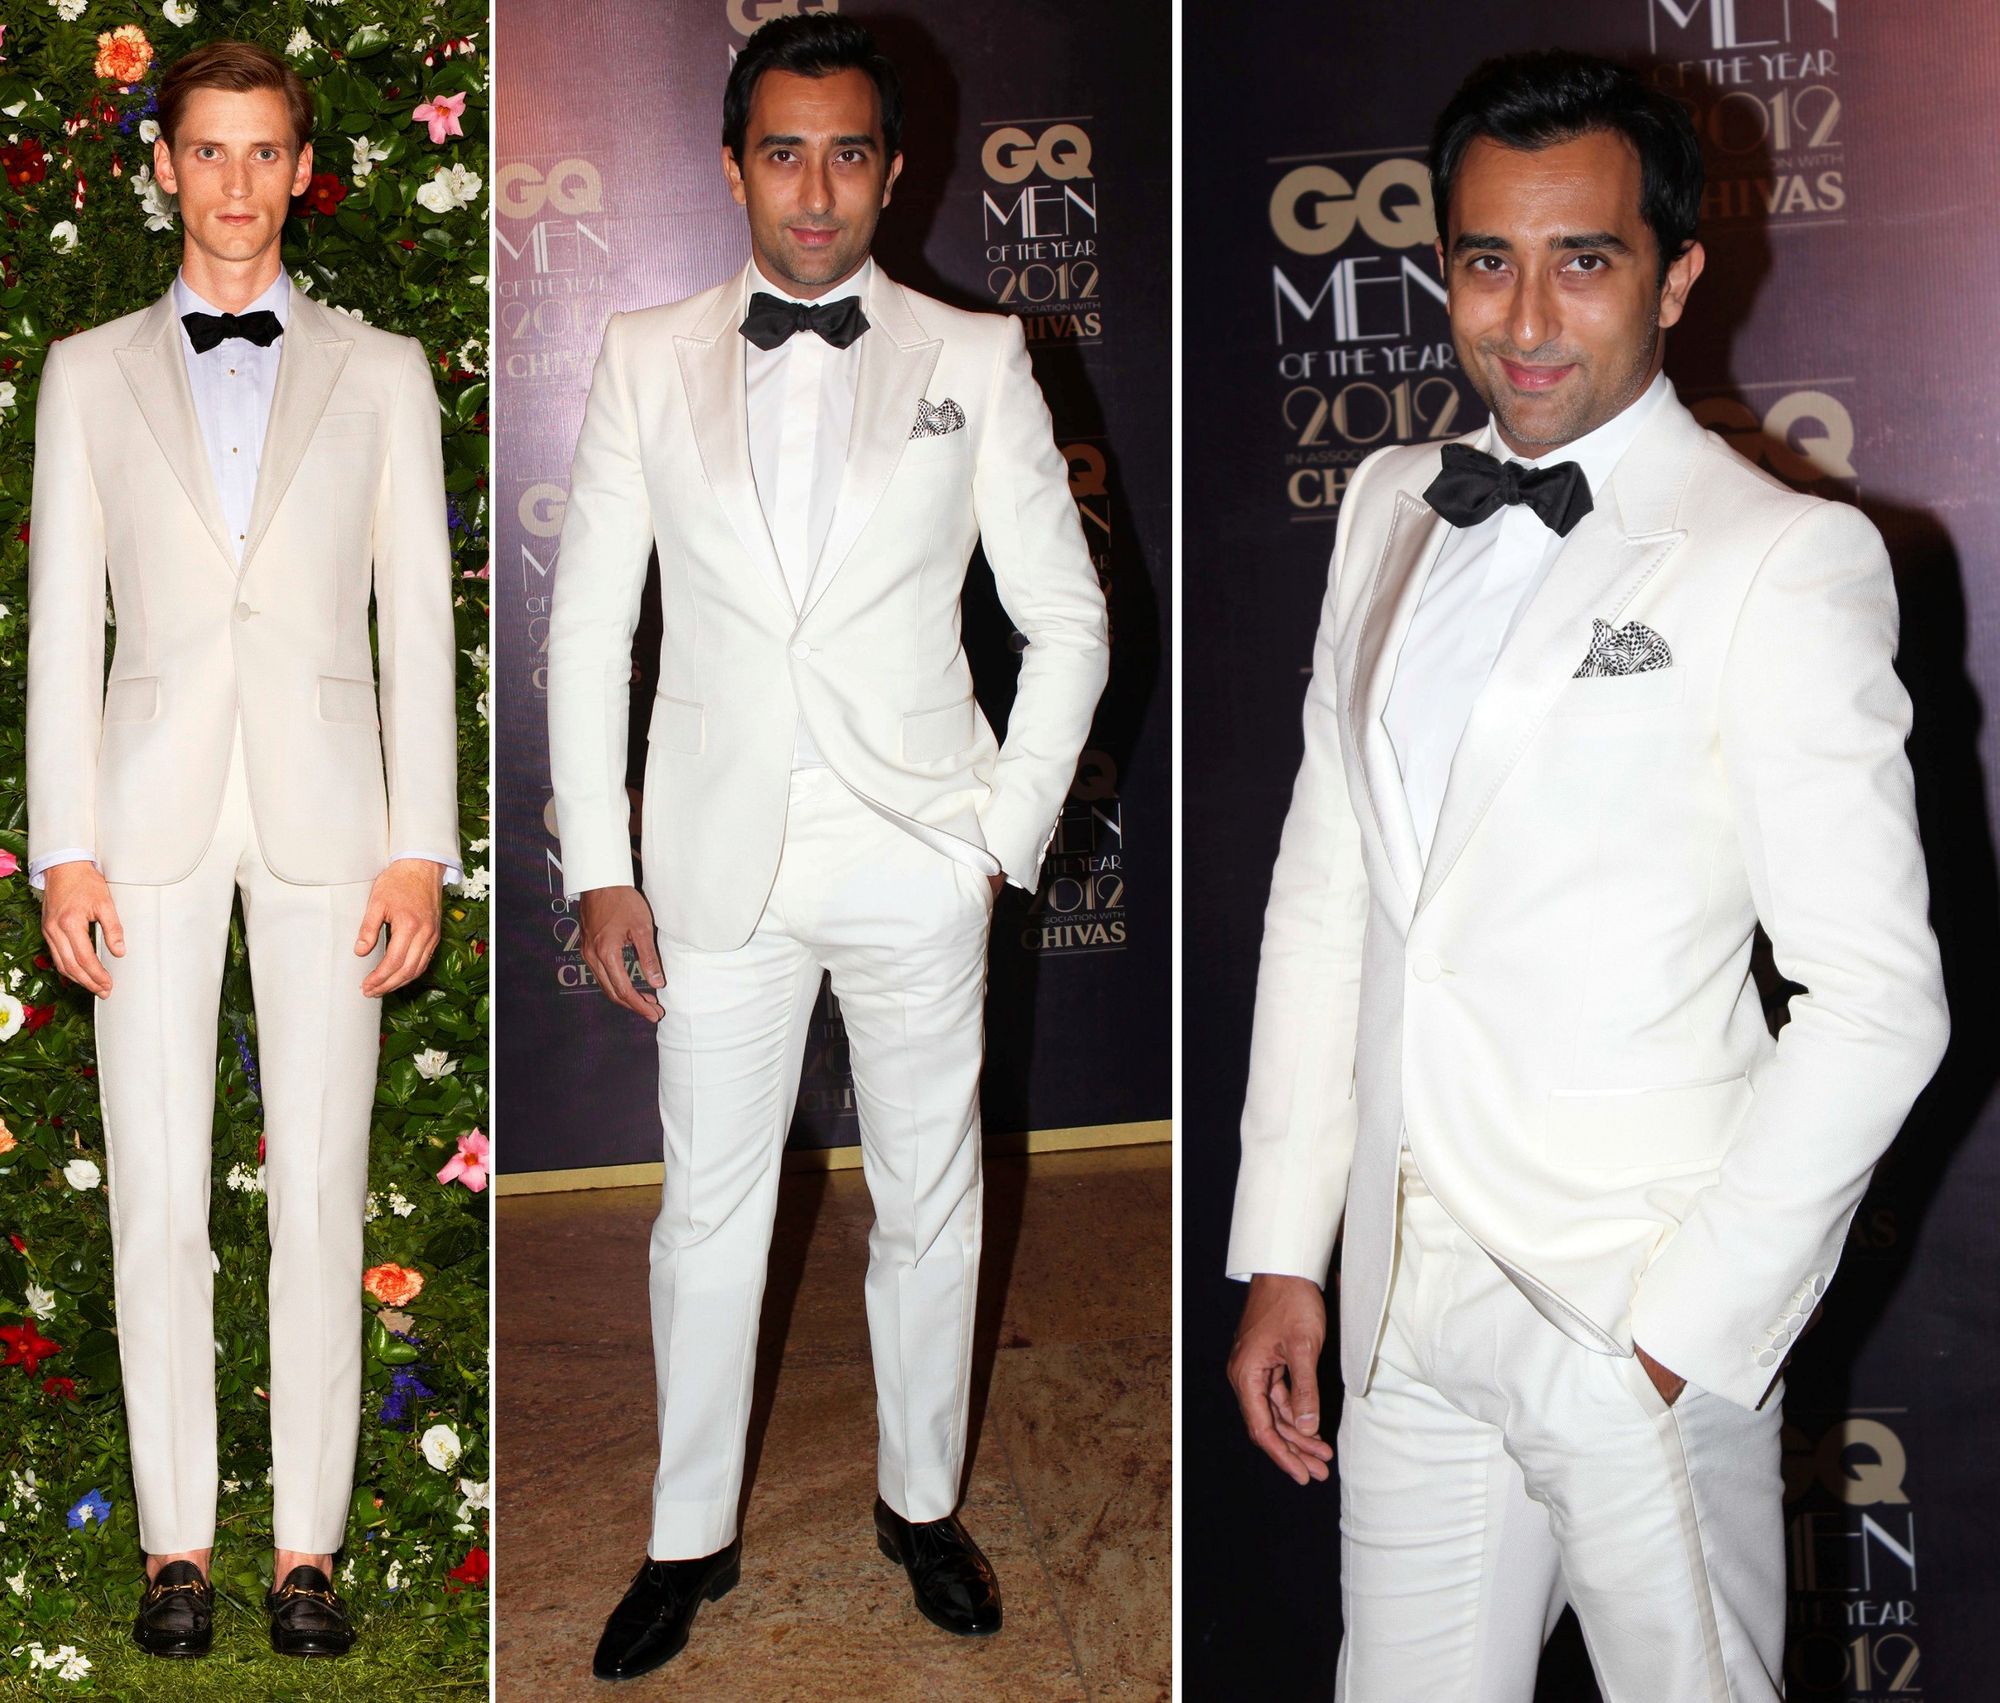 Rahul Khanna in Gucci 2013 at GQ India's 2012 Men of the Year Awards (Photo courtesy | Gucci)